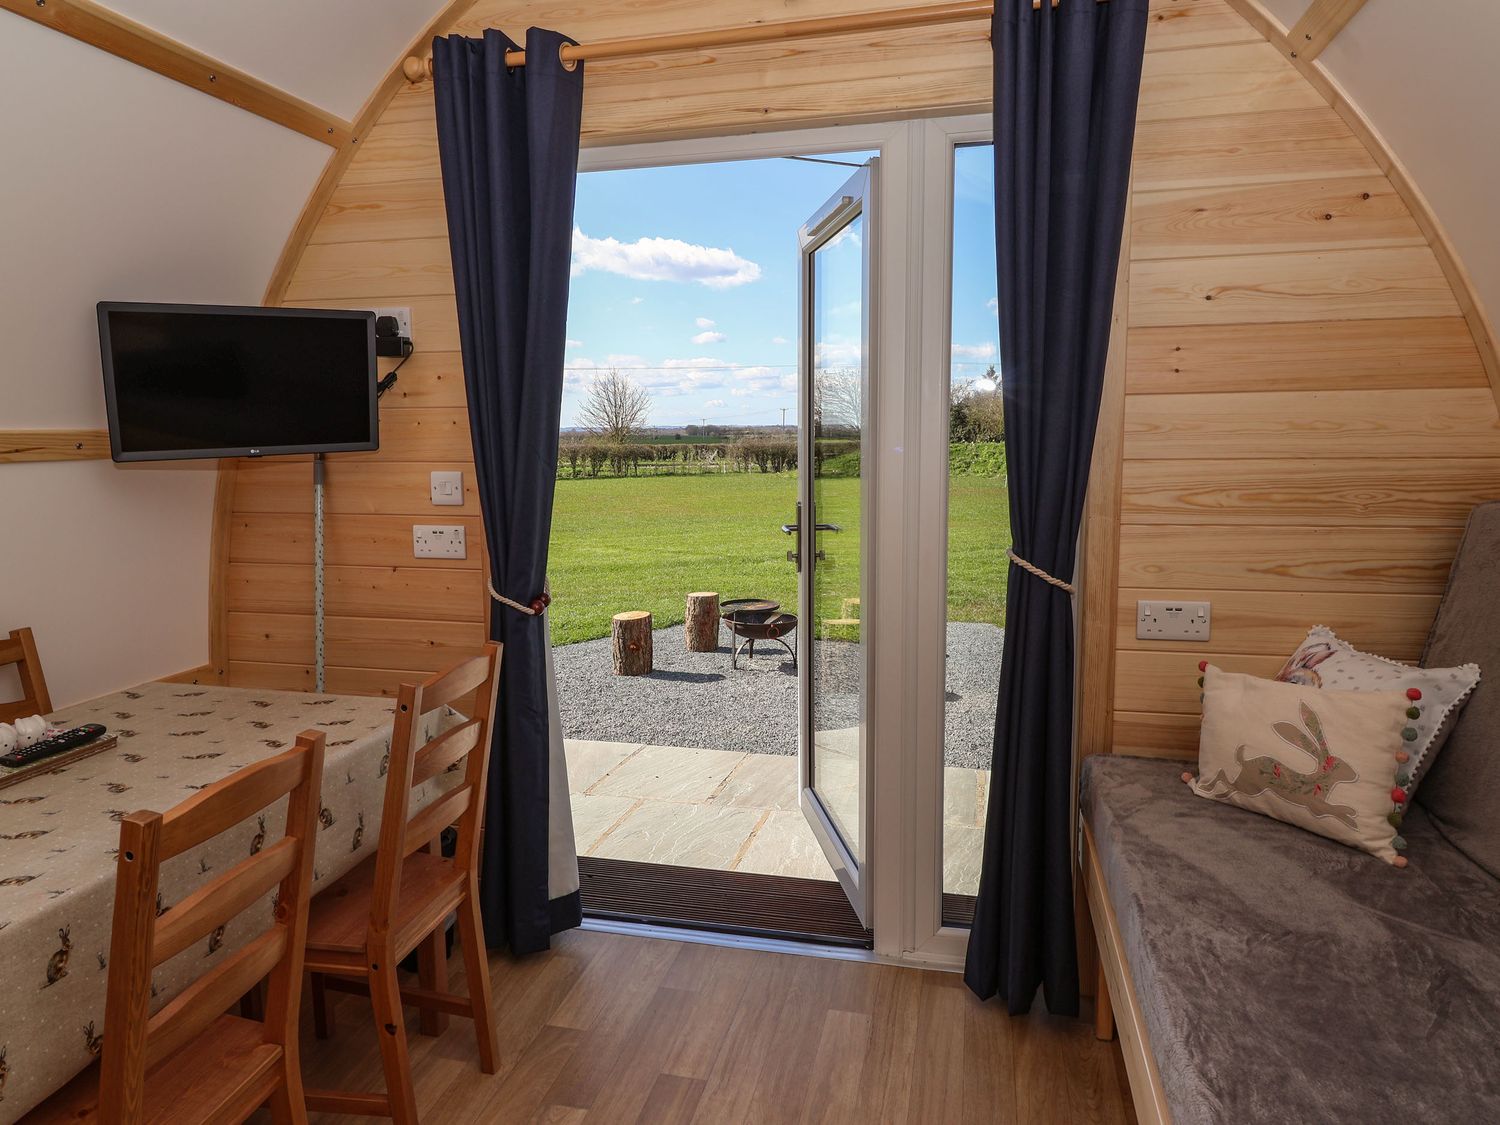 Husk, Bridlington in Yorkshire, romantic, countryside views, studio-style layout, parking, barbecue.